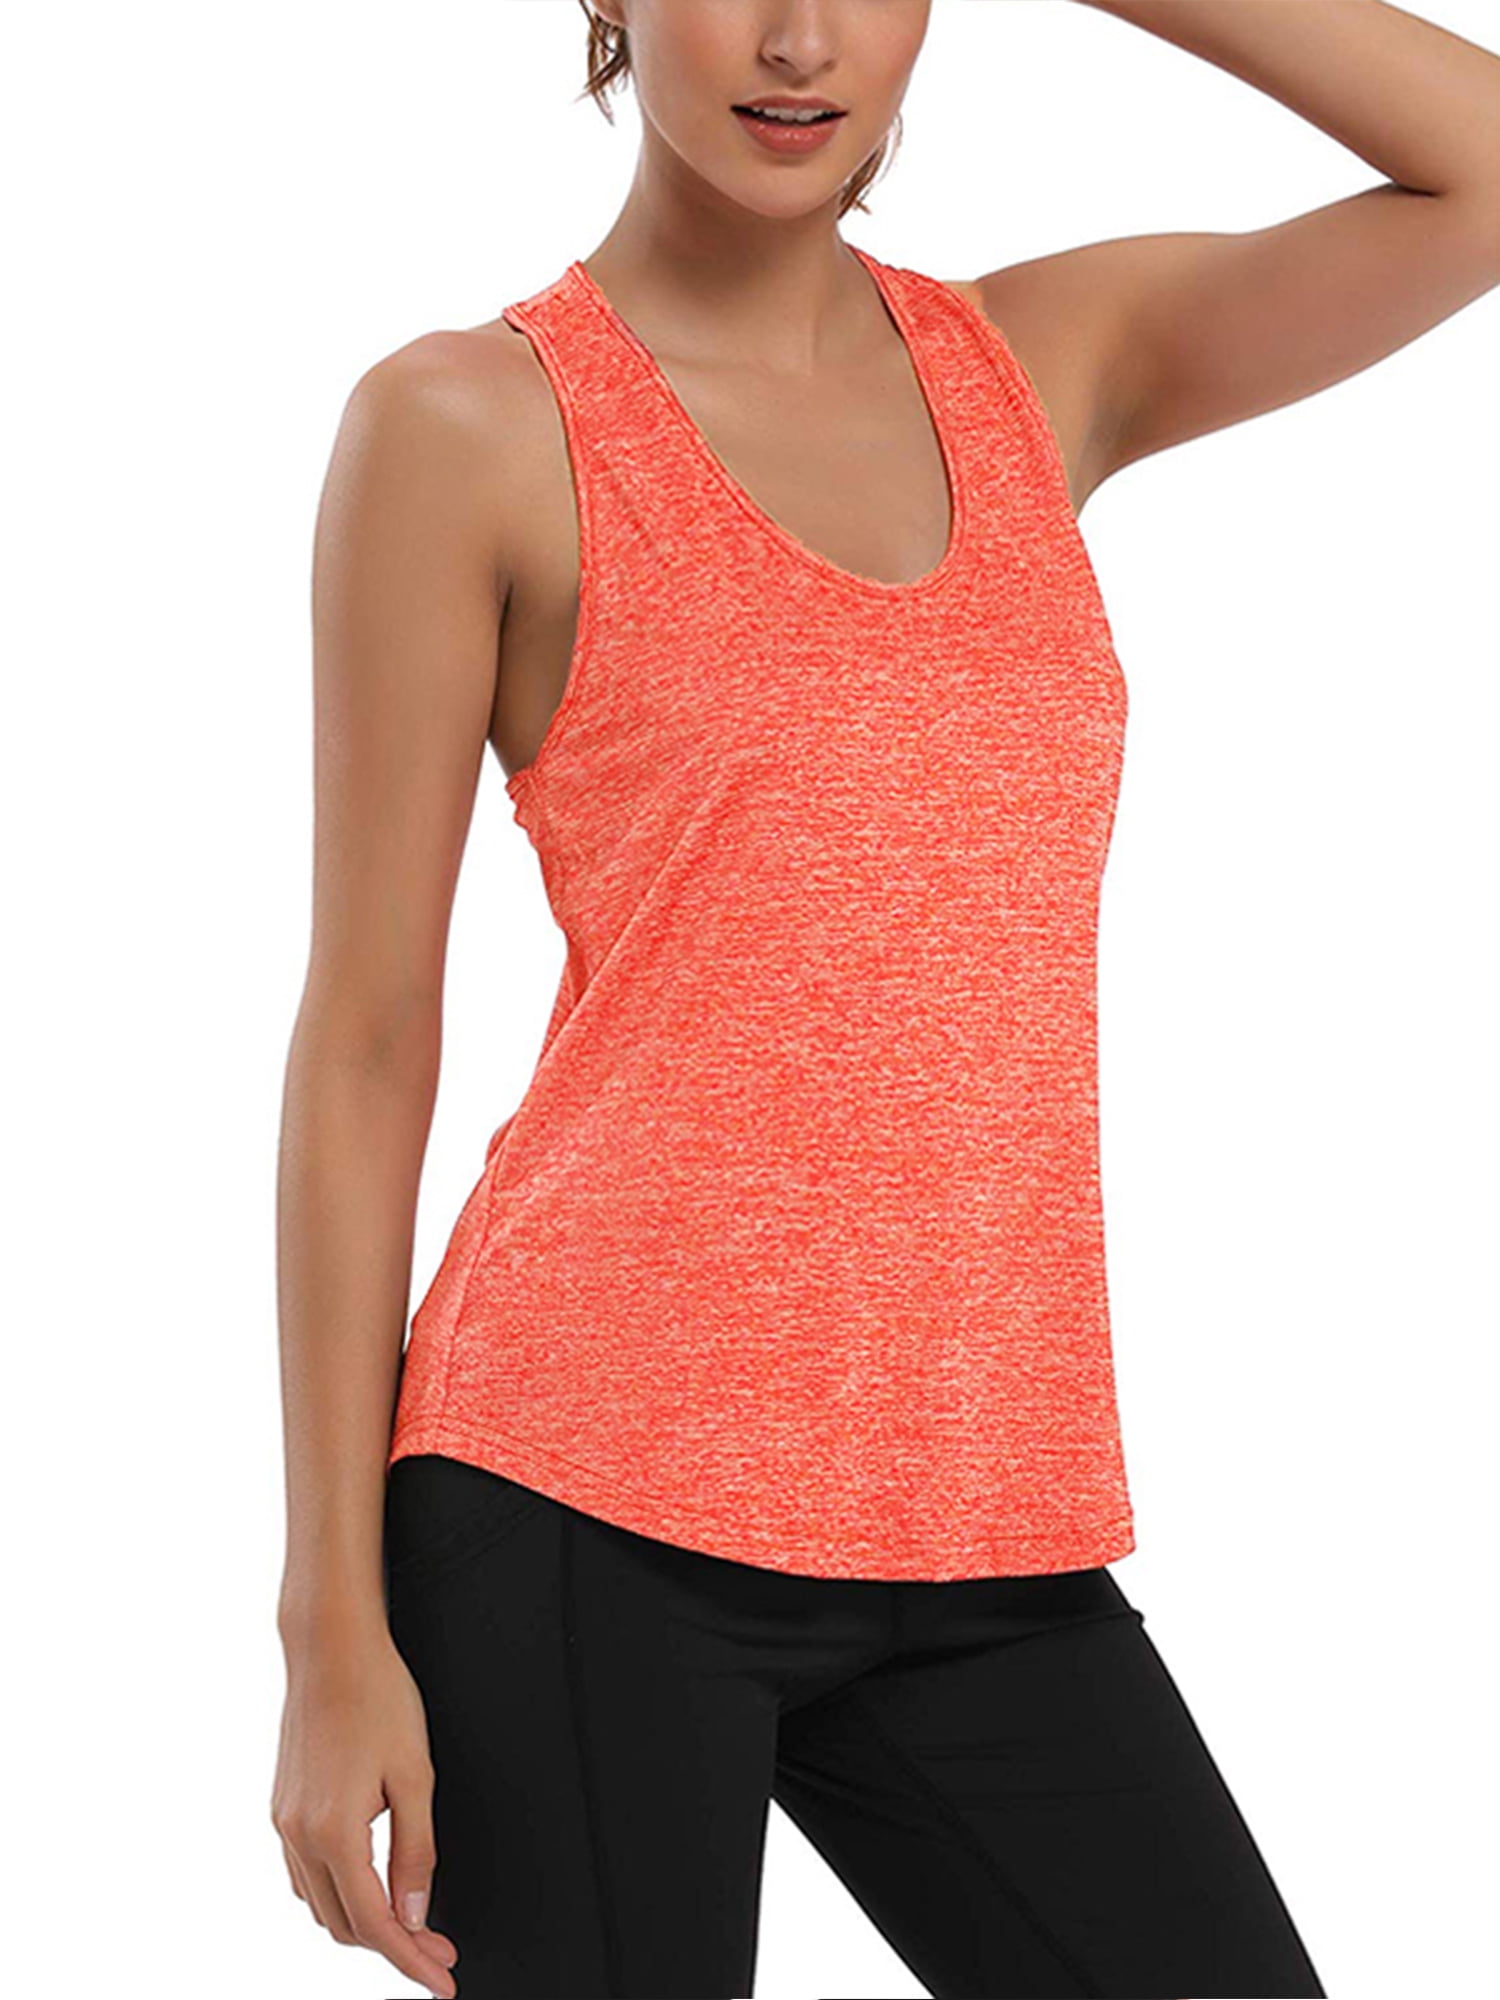 Women Sleeveless Loose Sports Vest Fitness Gym Yoga Workout Tank Tops Fit Blouse